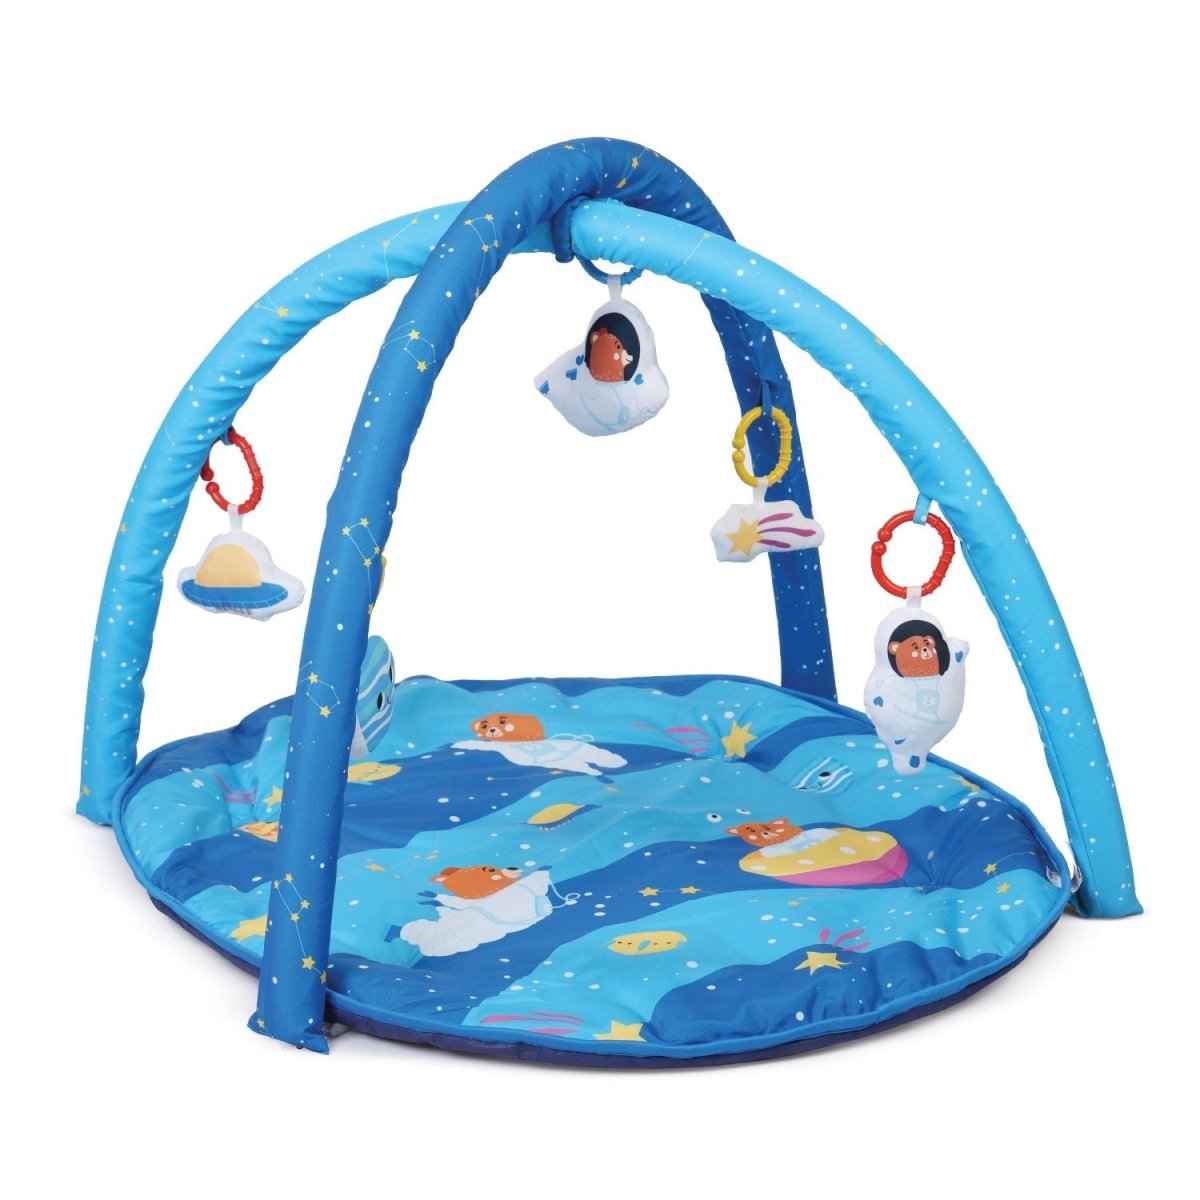 Nuluv Playgym- Space - NU-I-0014